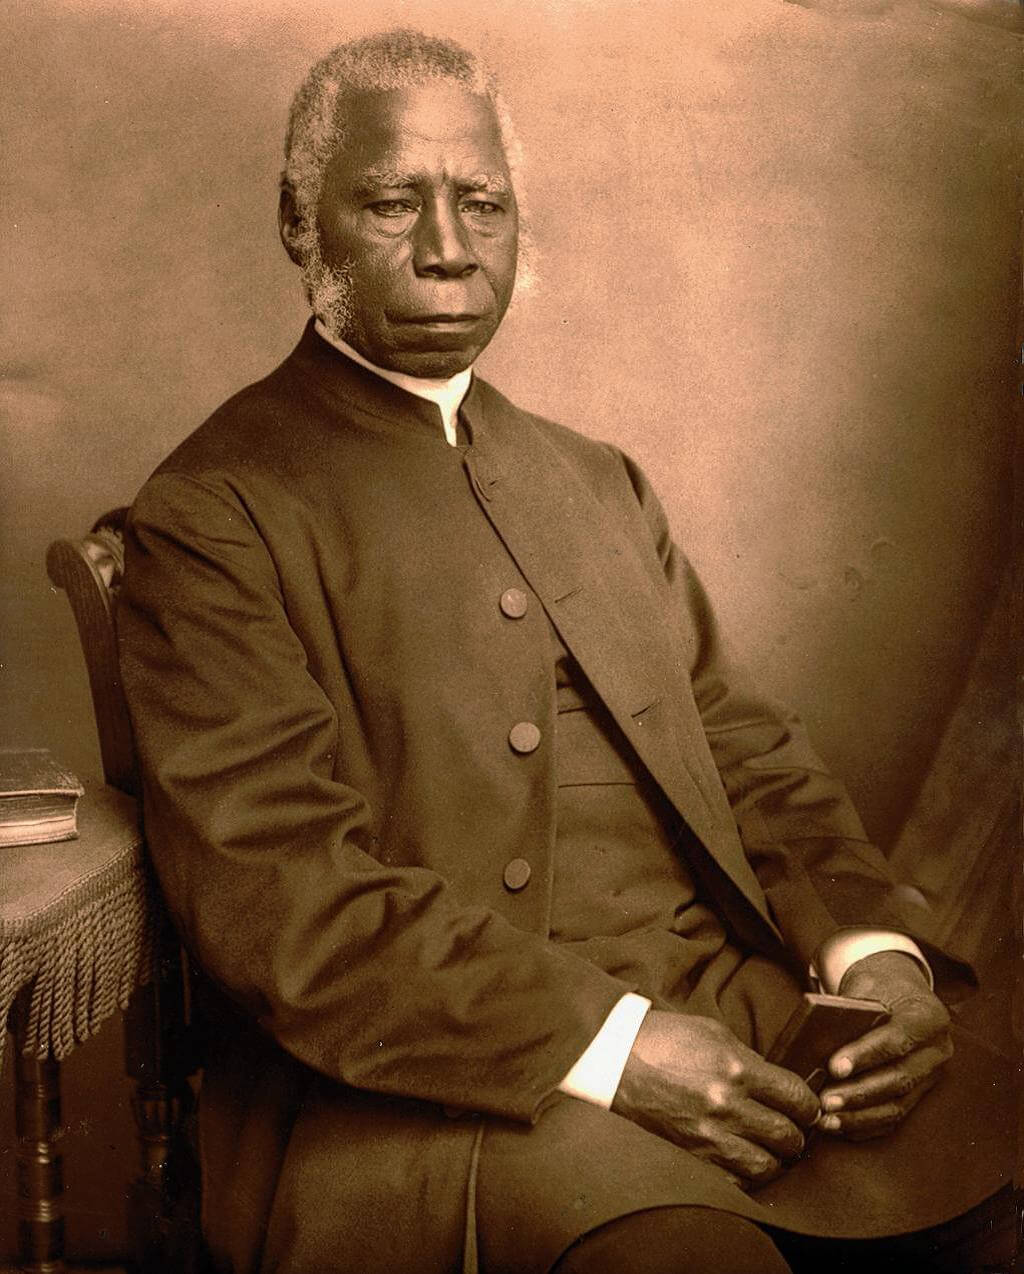 BISHOP SAMUEL ADJAI CROWTHER (1809-1891) - The First Black Bishop in The Anglican Church - African Leaders Magazine 